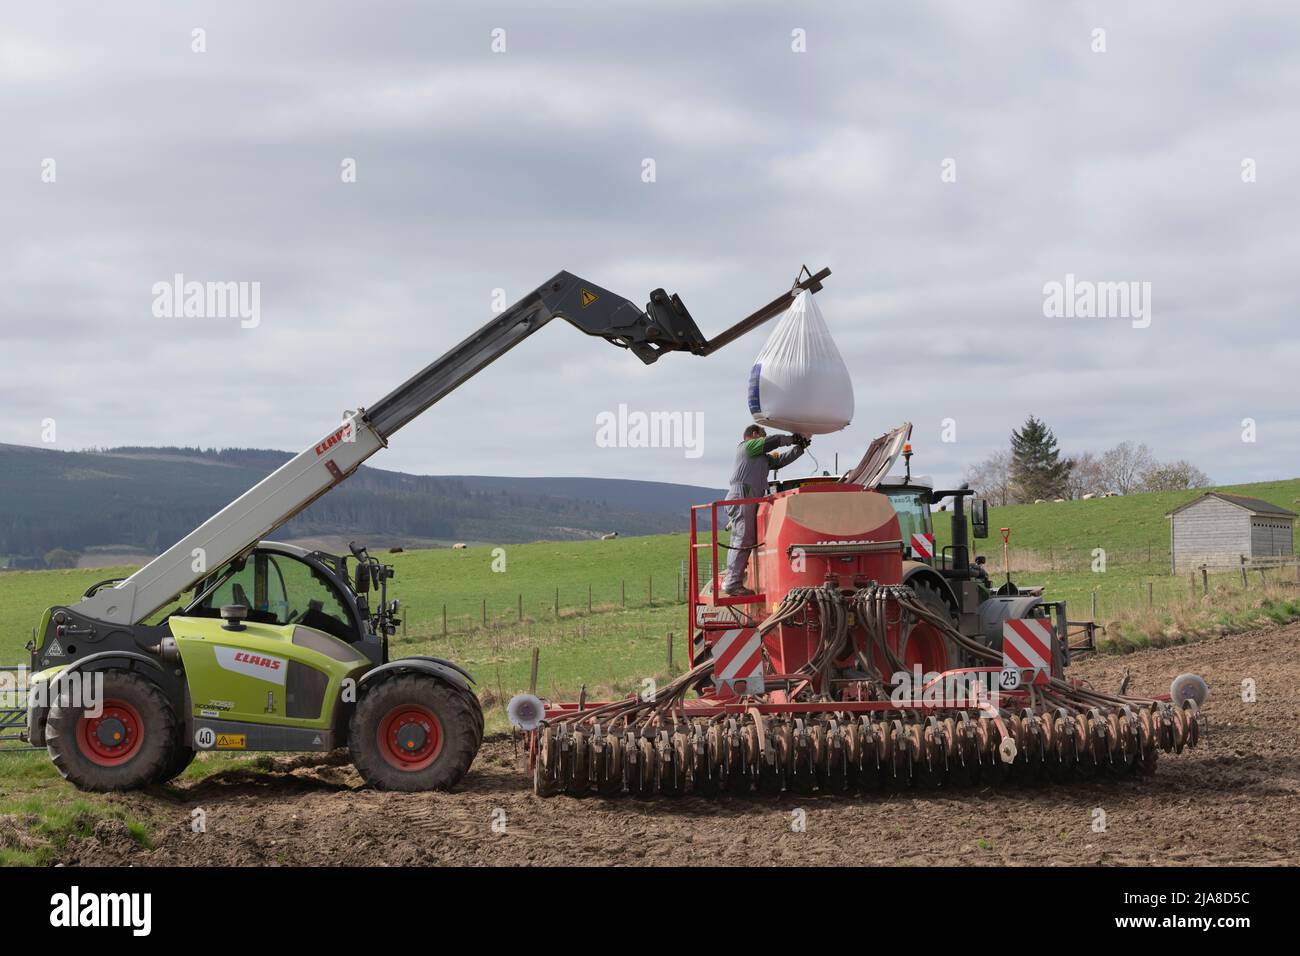 A Farmer Filling a Horsch Universal Seed Drill from a Merchant's Bag of Seed Suspended from a Claas Telehandler in a Ploughed Field Stock Photo